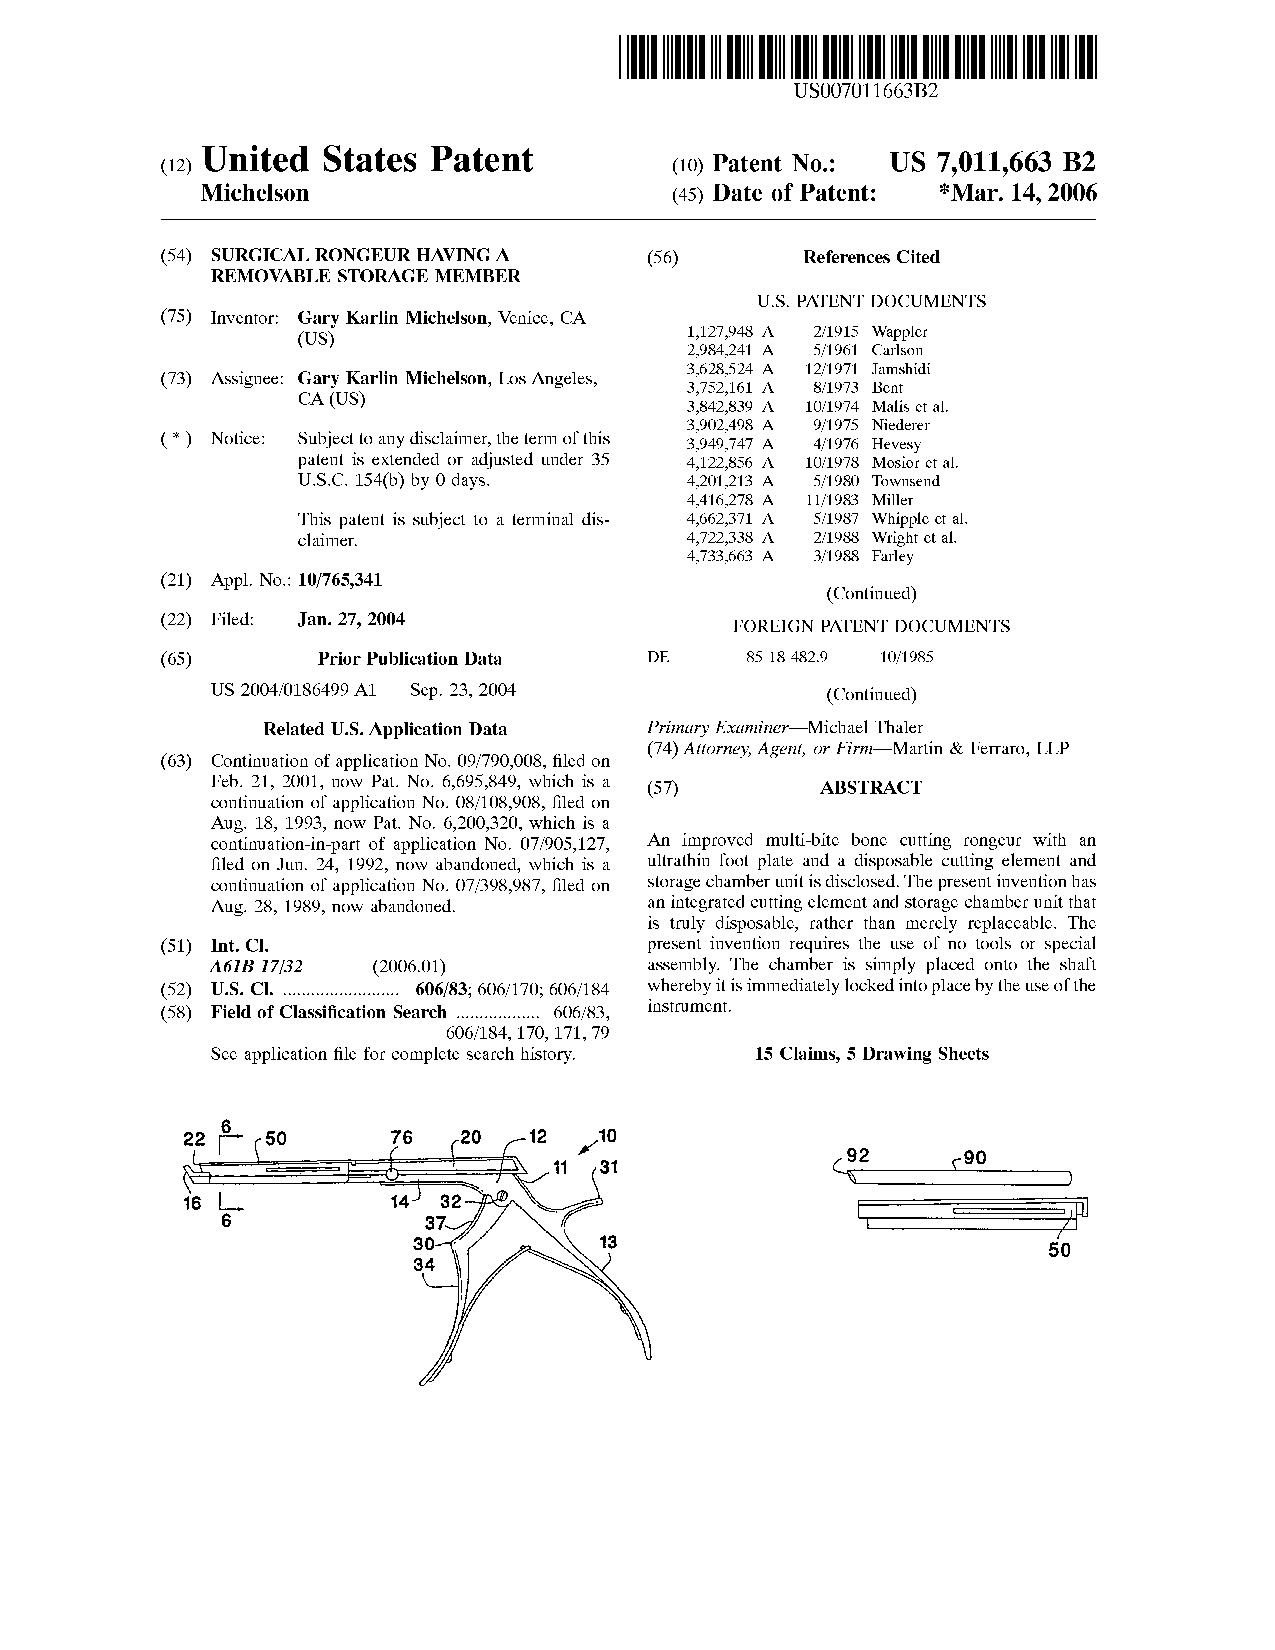 Surgical rongeur having a removable storage member - Patent 7,011,663